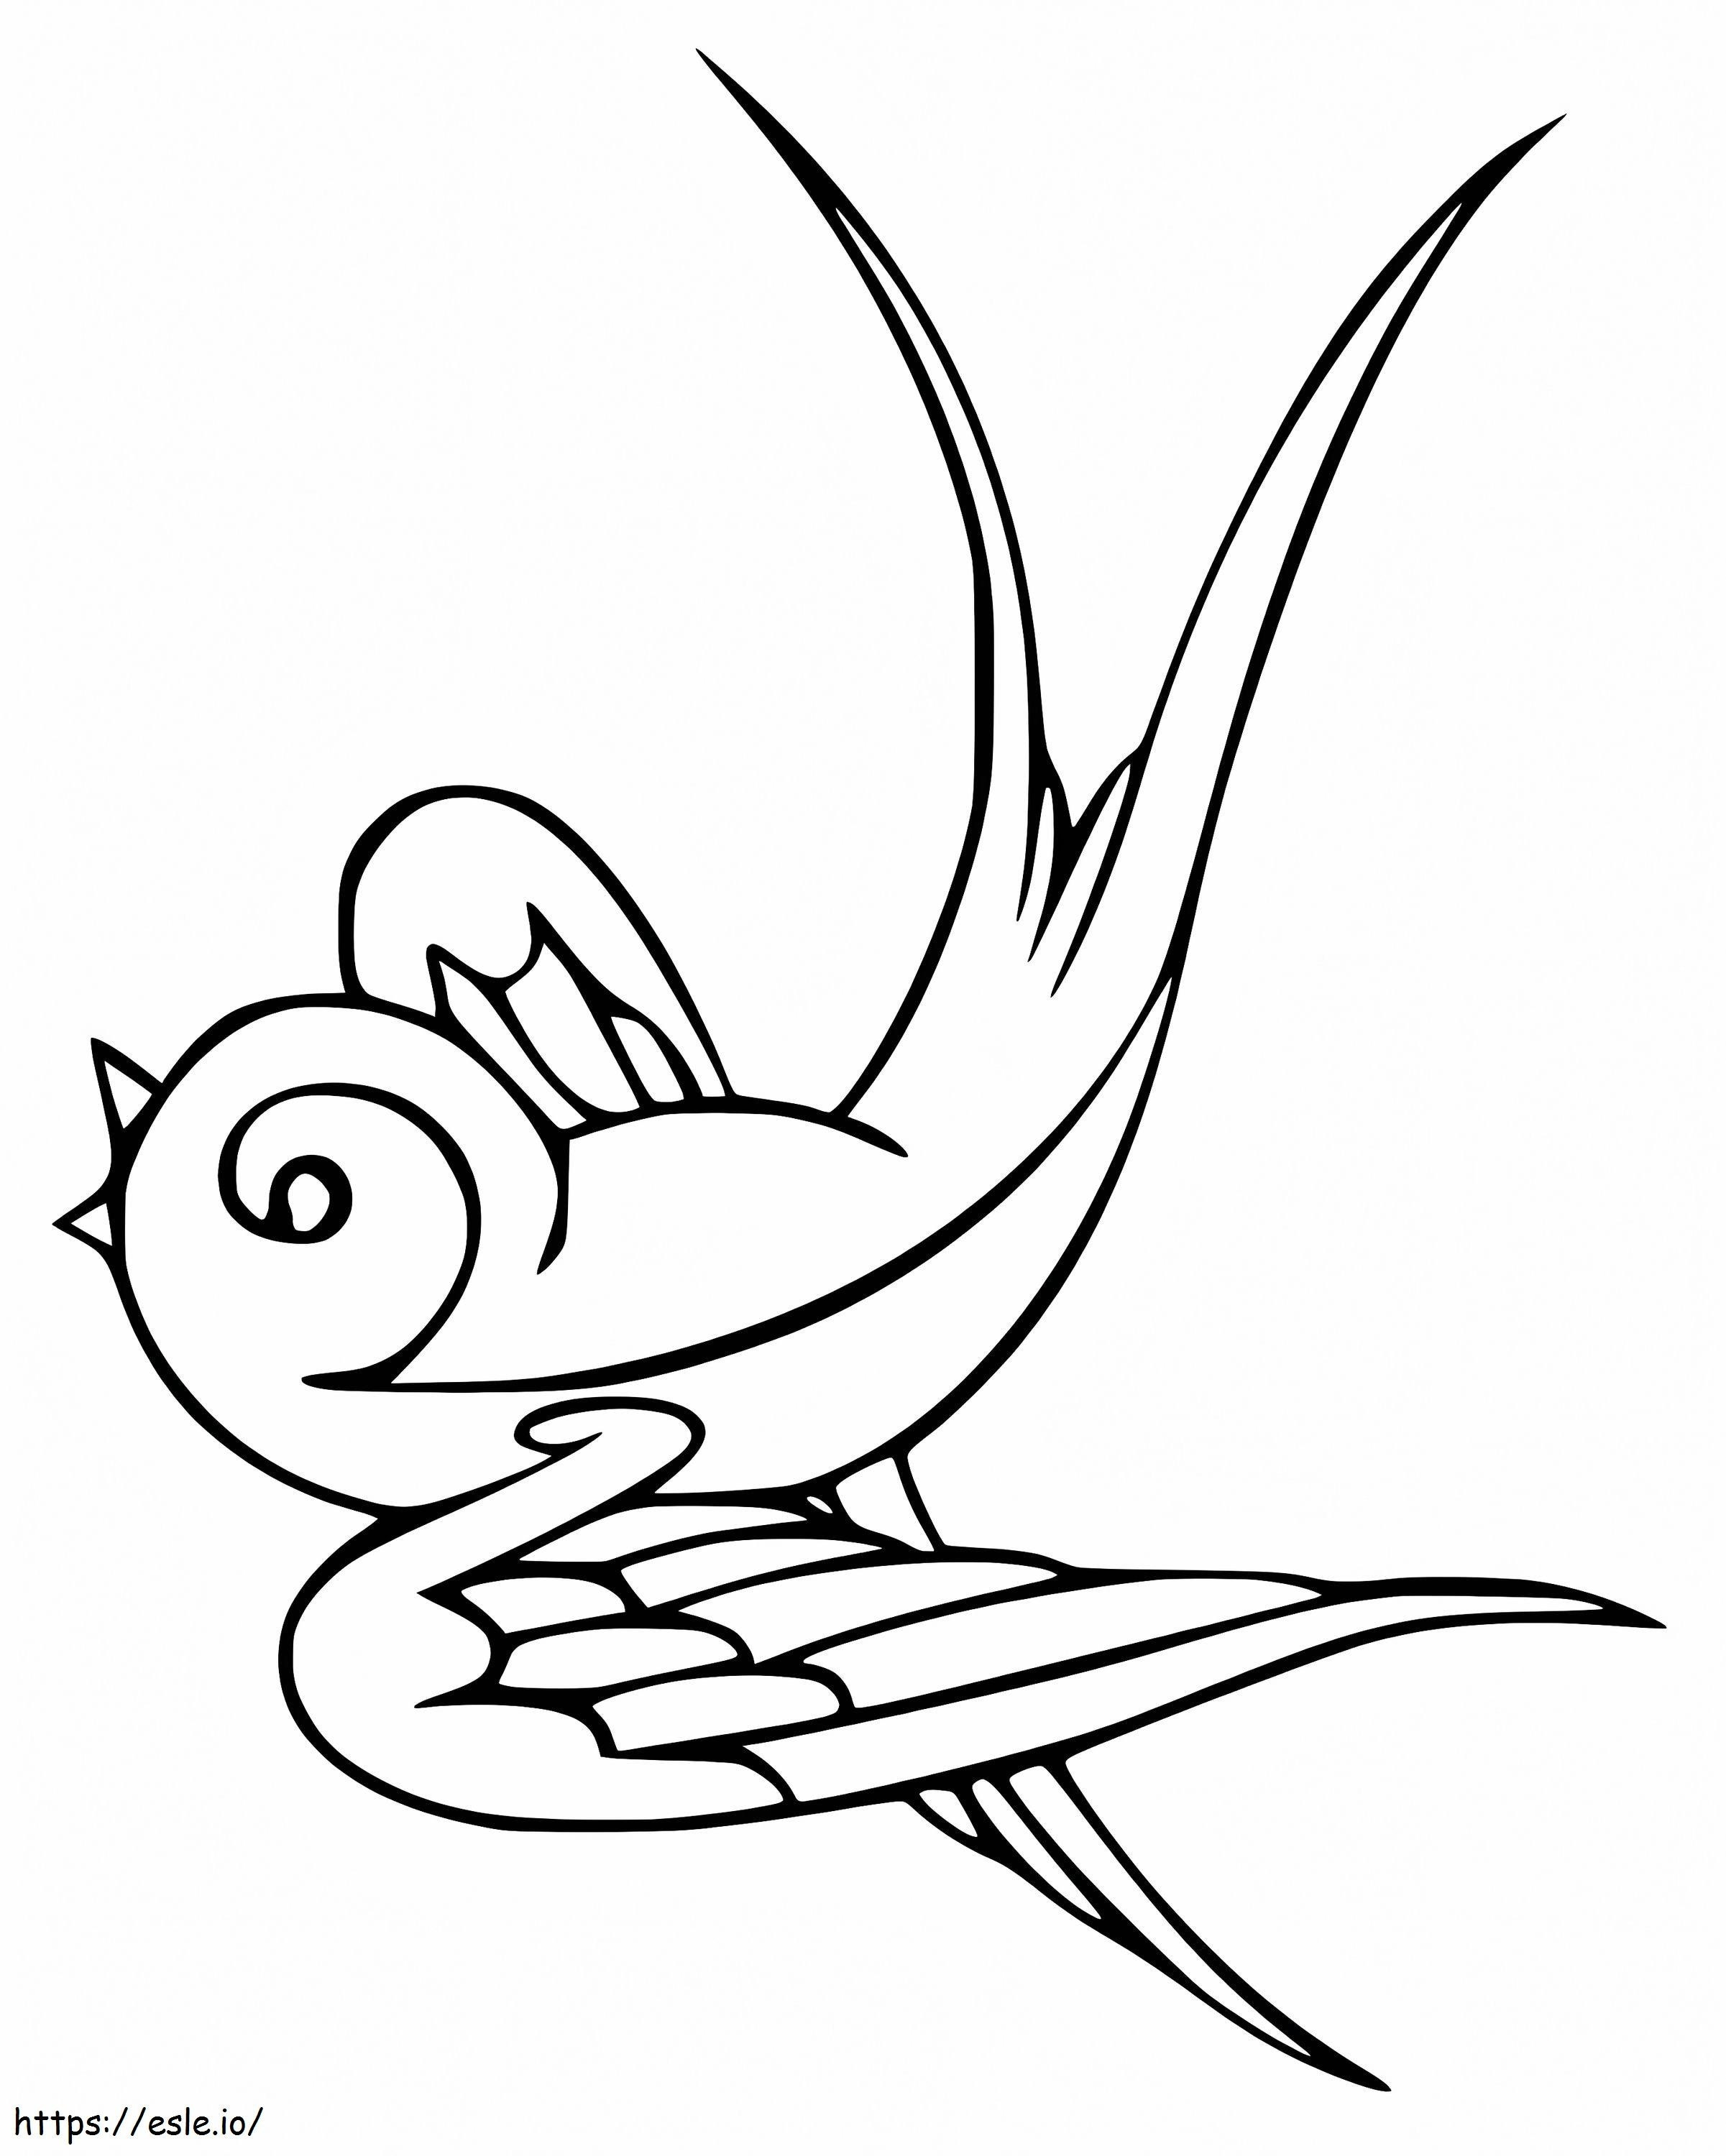 Swallow 2 coloring page